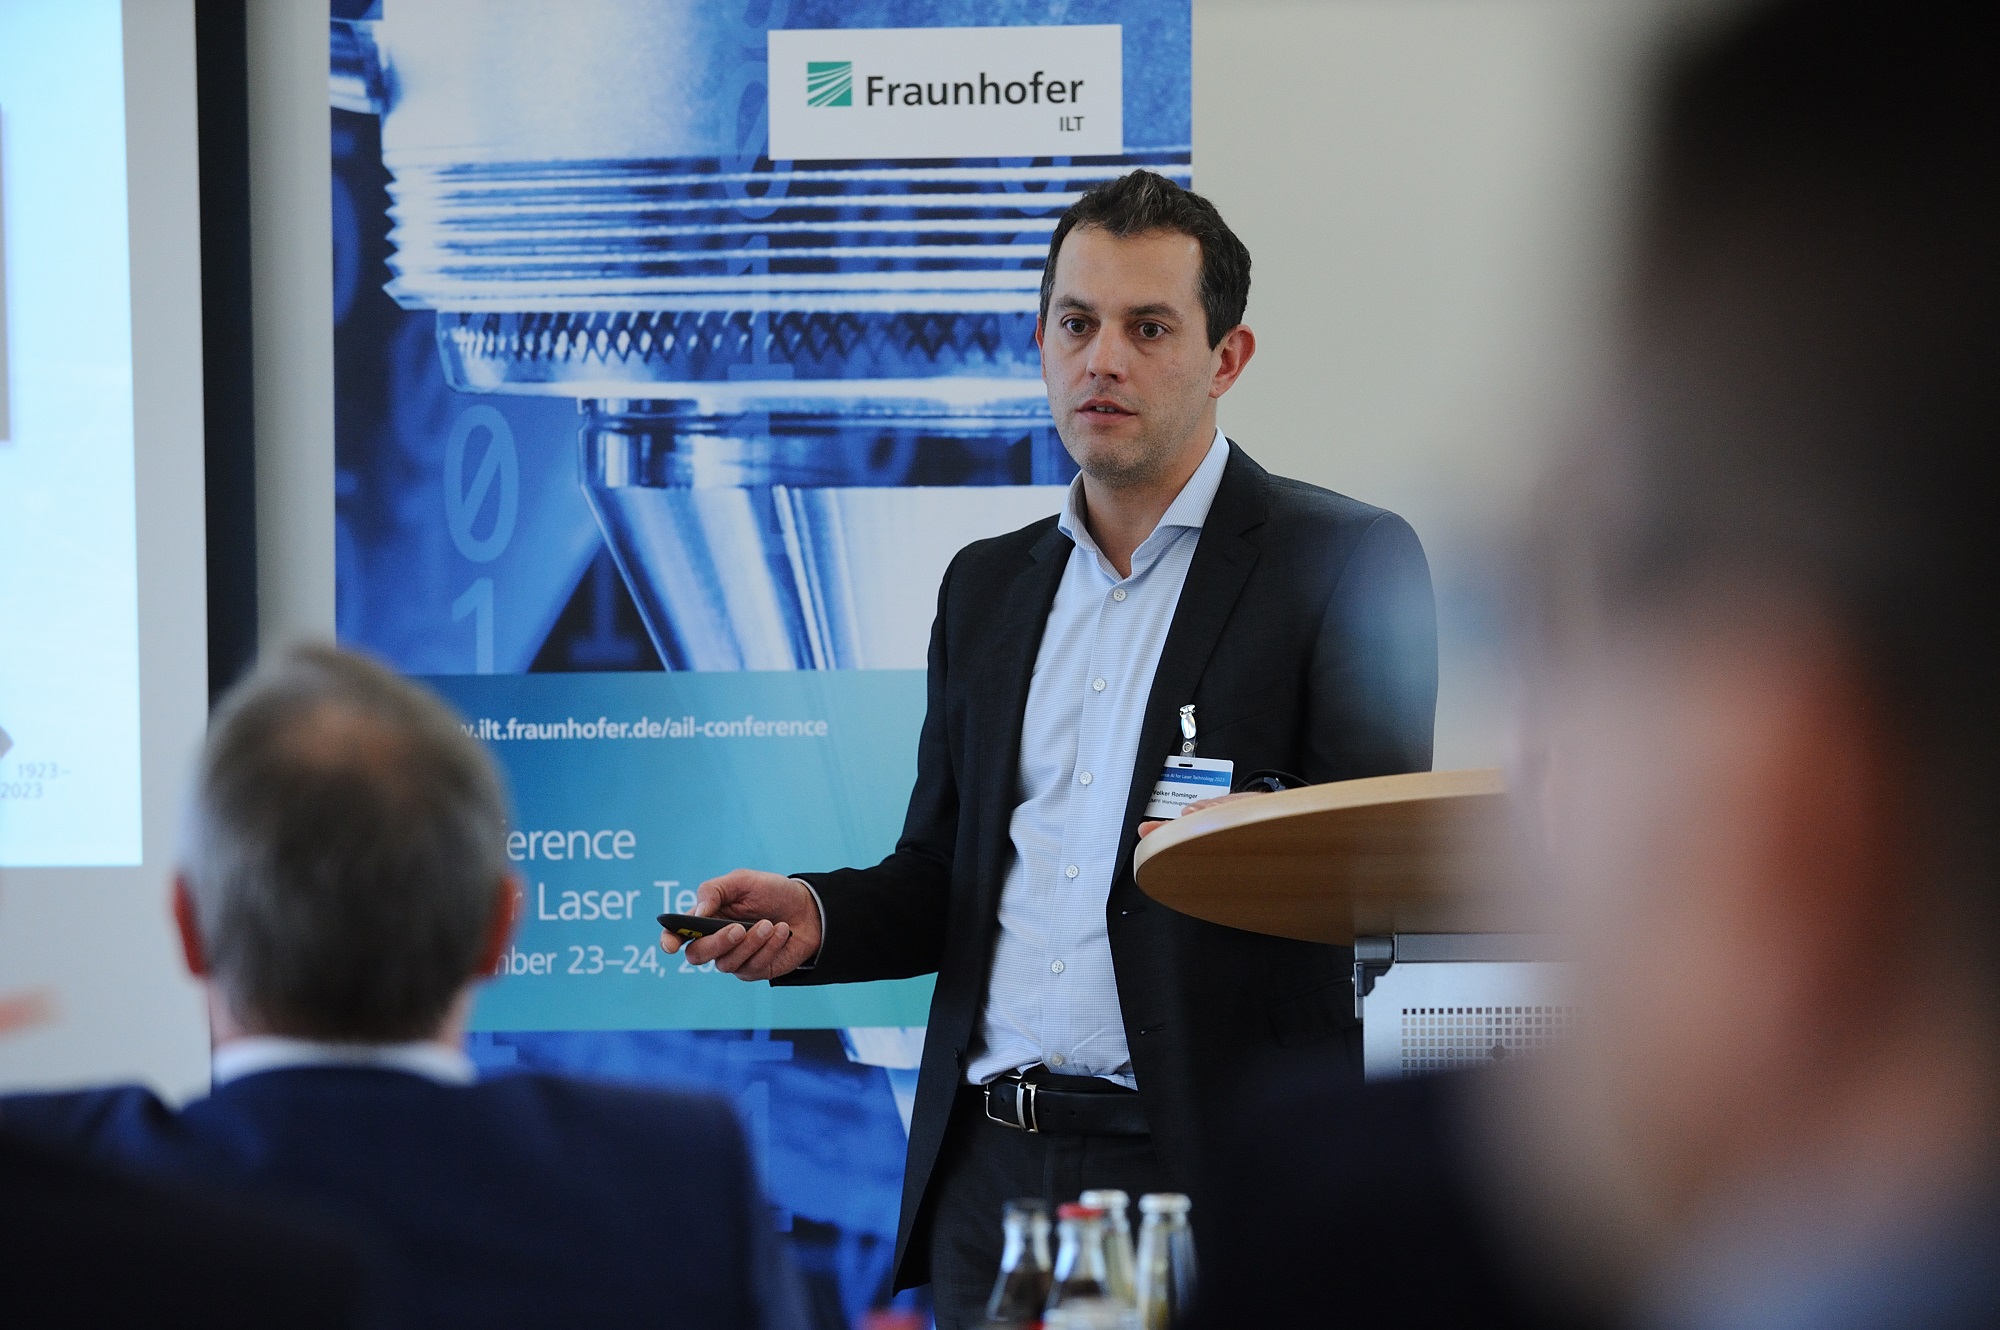 "Machine learning is no longer a vision, but a reality. We can use it to significantly increase the productivity, reliability and quality of laser processes and, what’s more, this is only the tip of the iceberg," explained Dr. Volker Rominger, Head of Machine Learning & Simulation in Laser Applications at TRUMPF. 